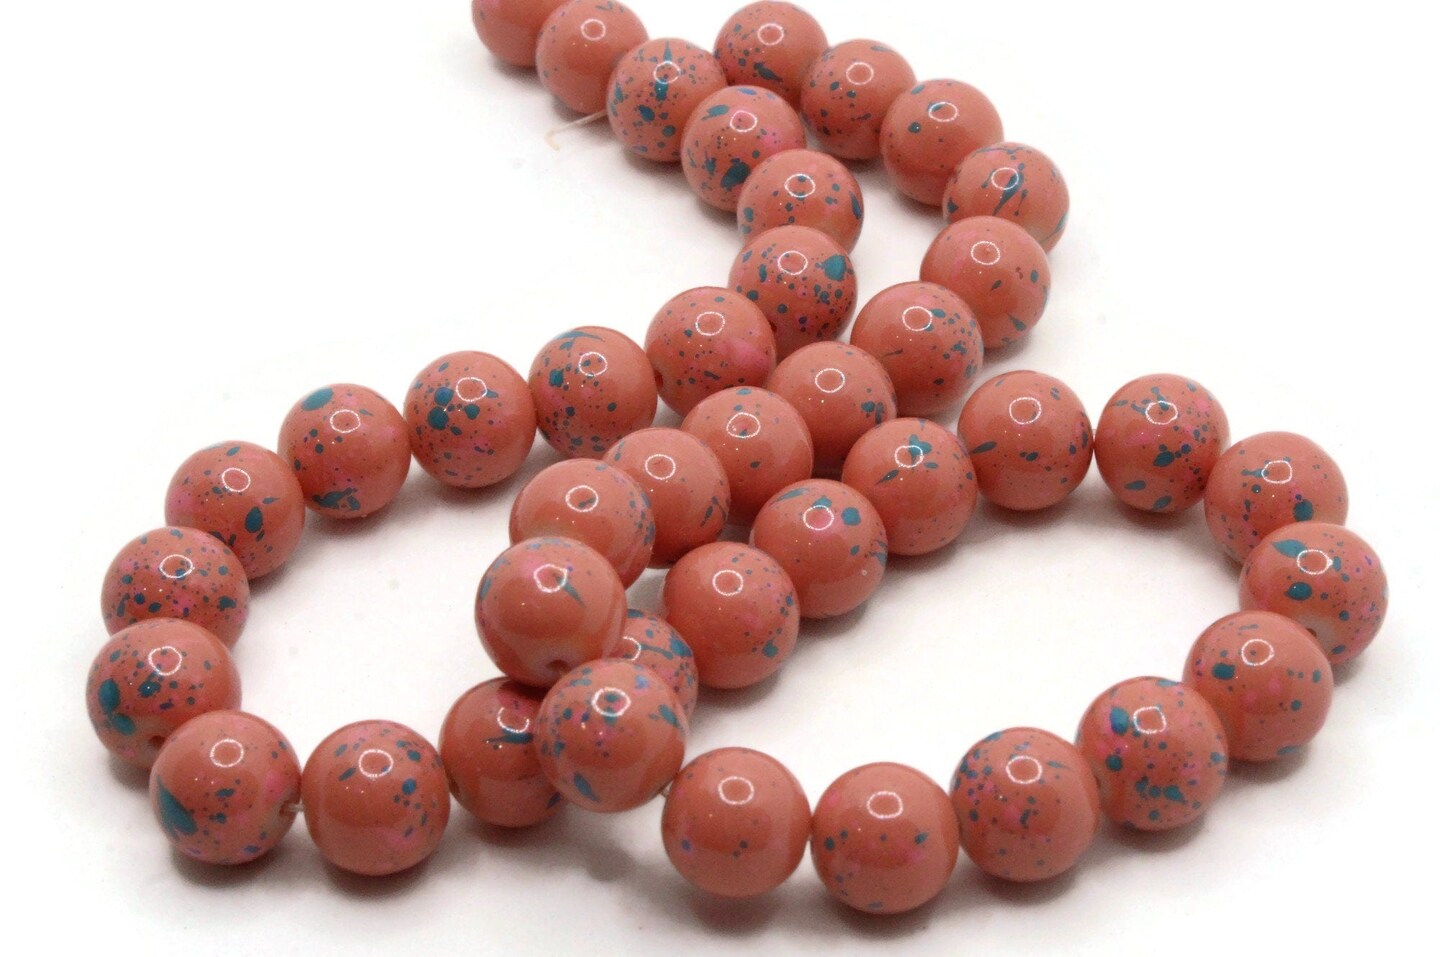 40 10mm Coral and Blue Splatter Paint Smooth Round Glass Beads